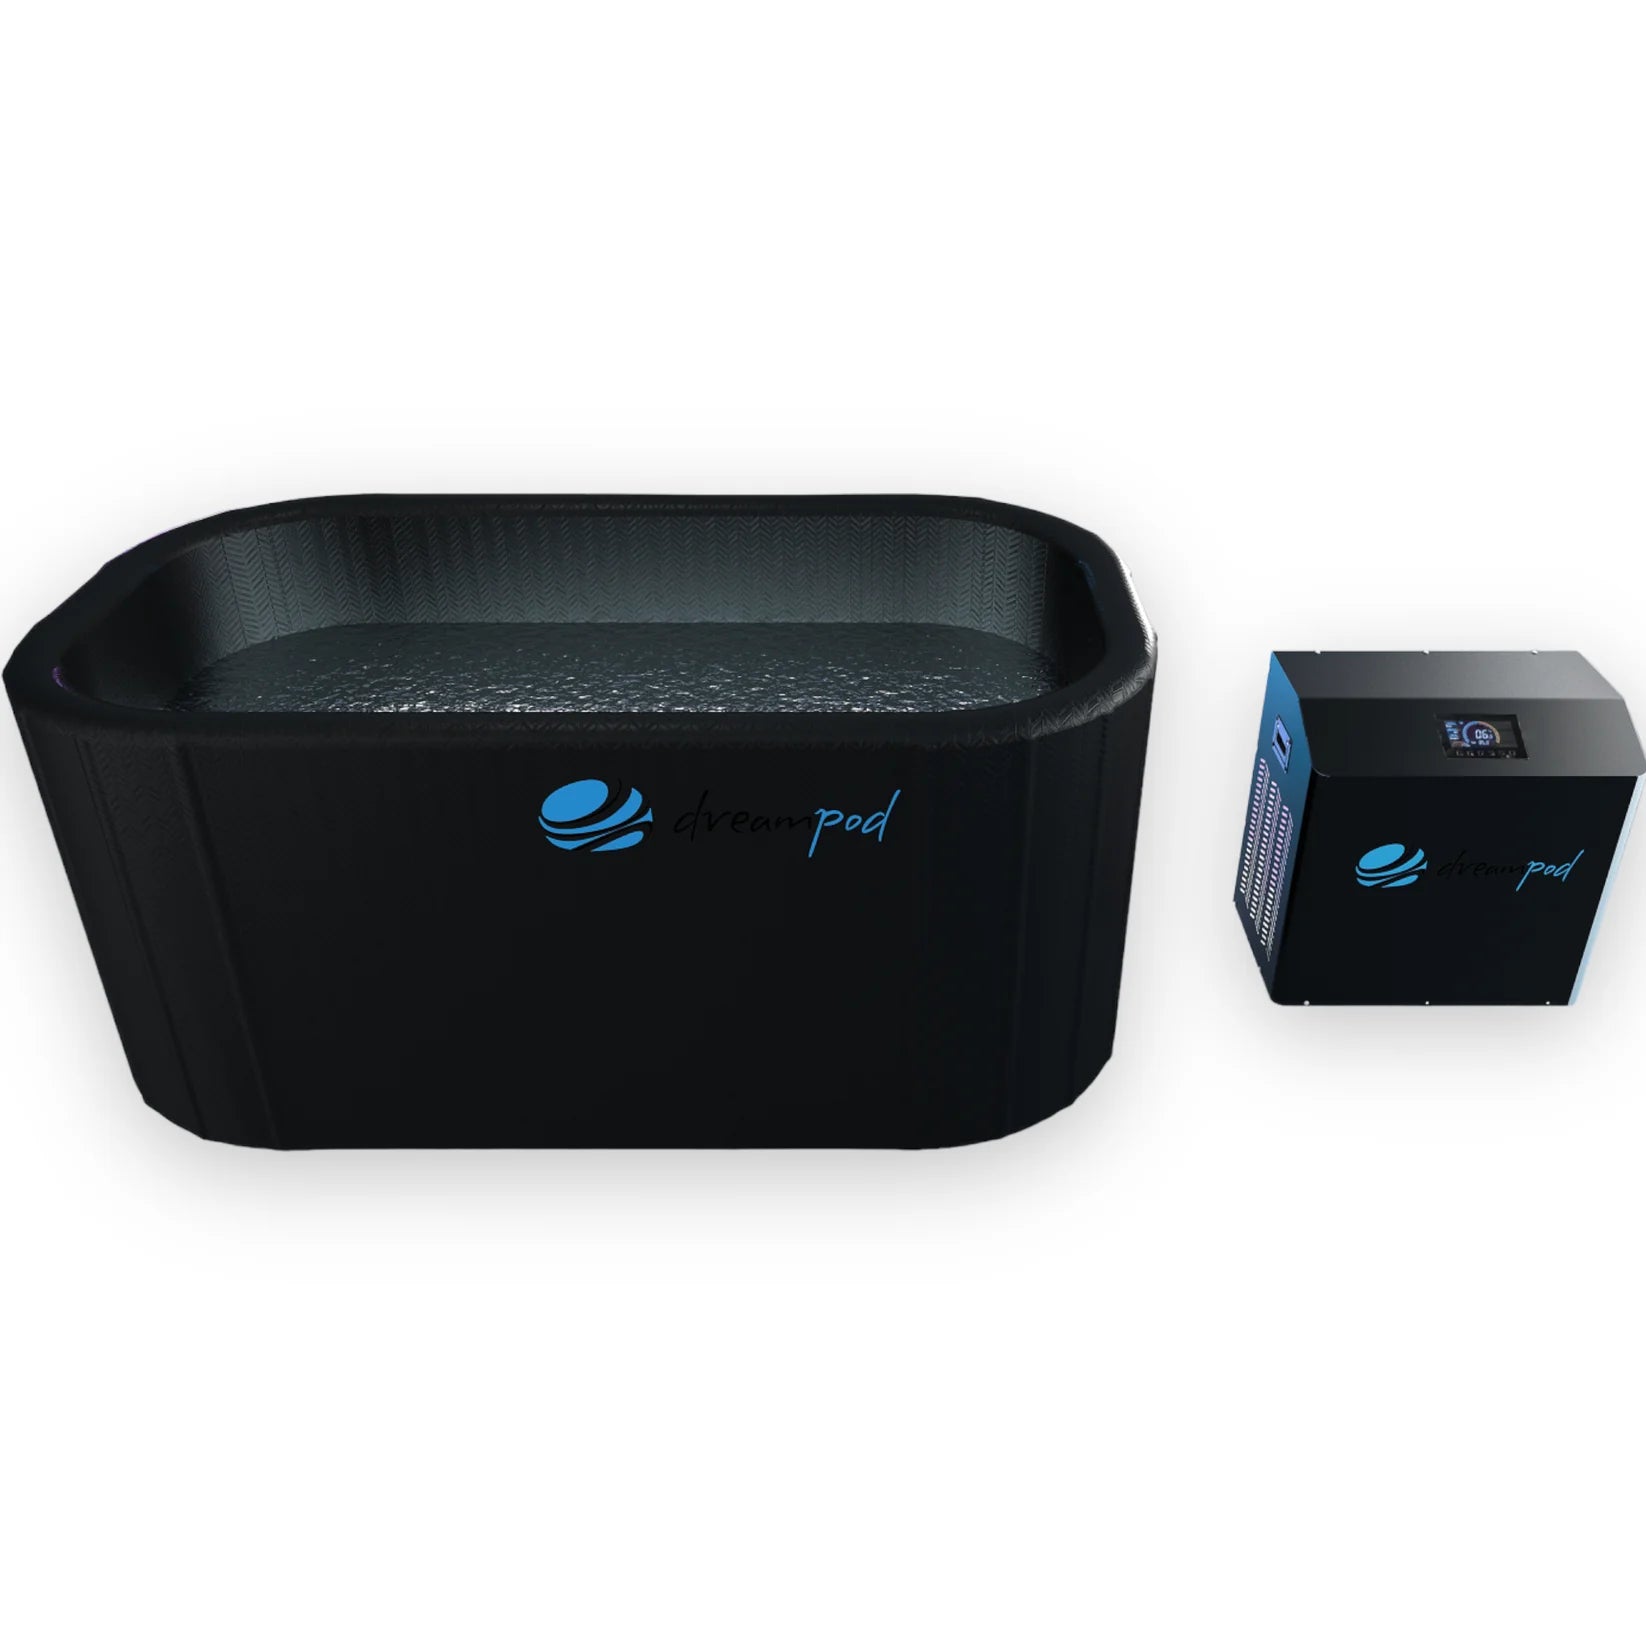 Dreampod Flex - At Home Cold Plunge, Ideal Home Gym